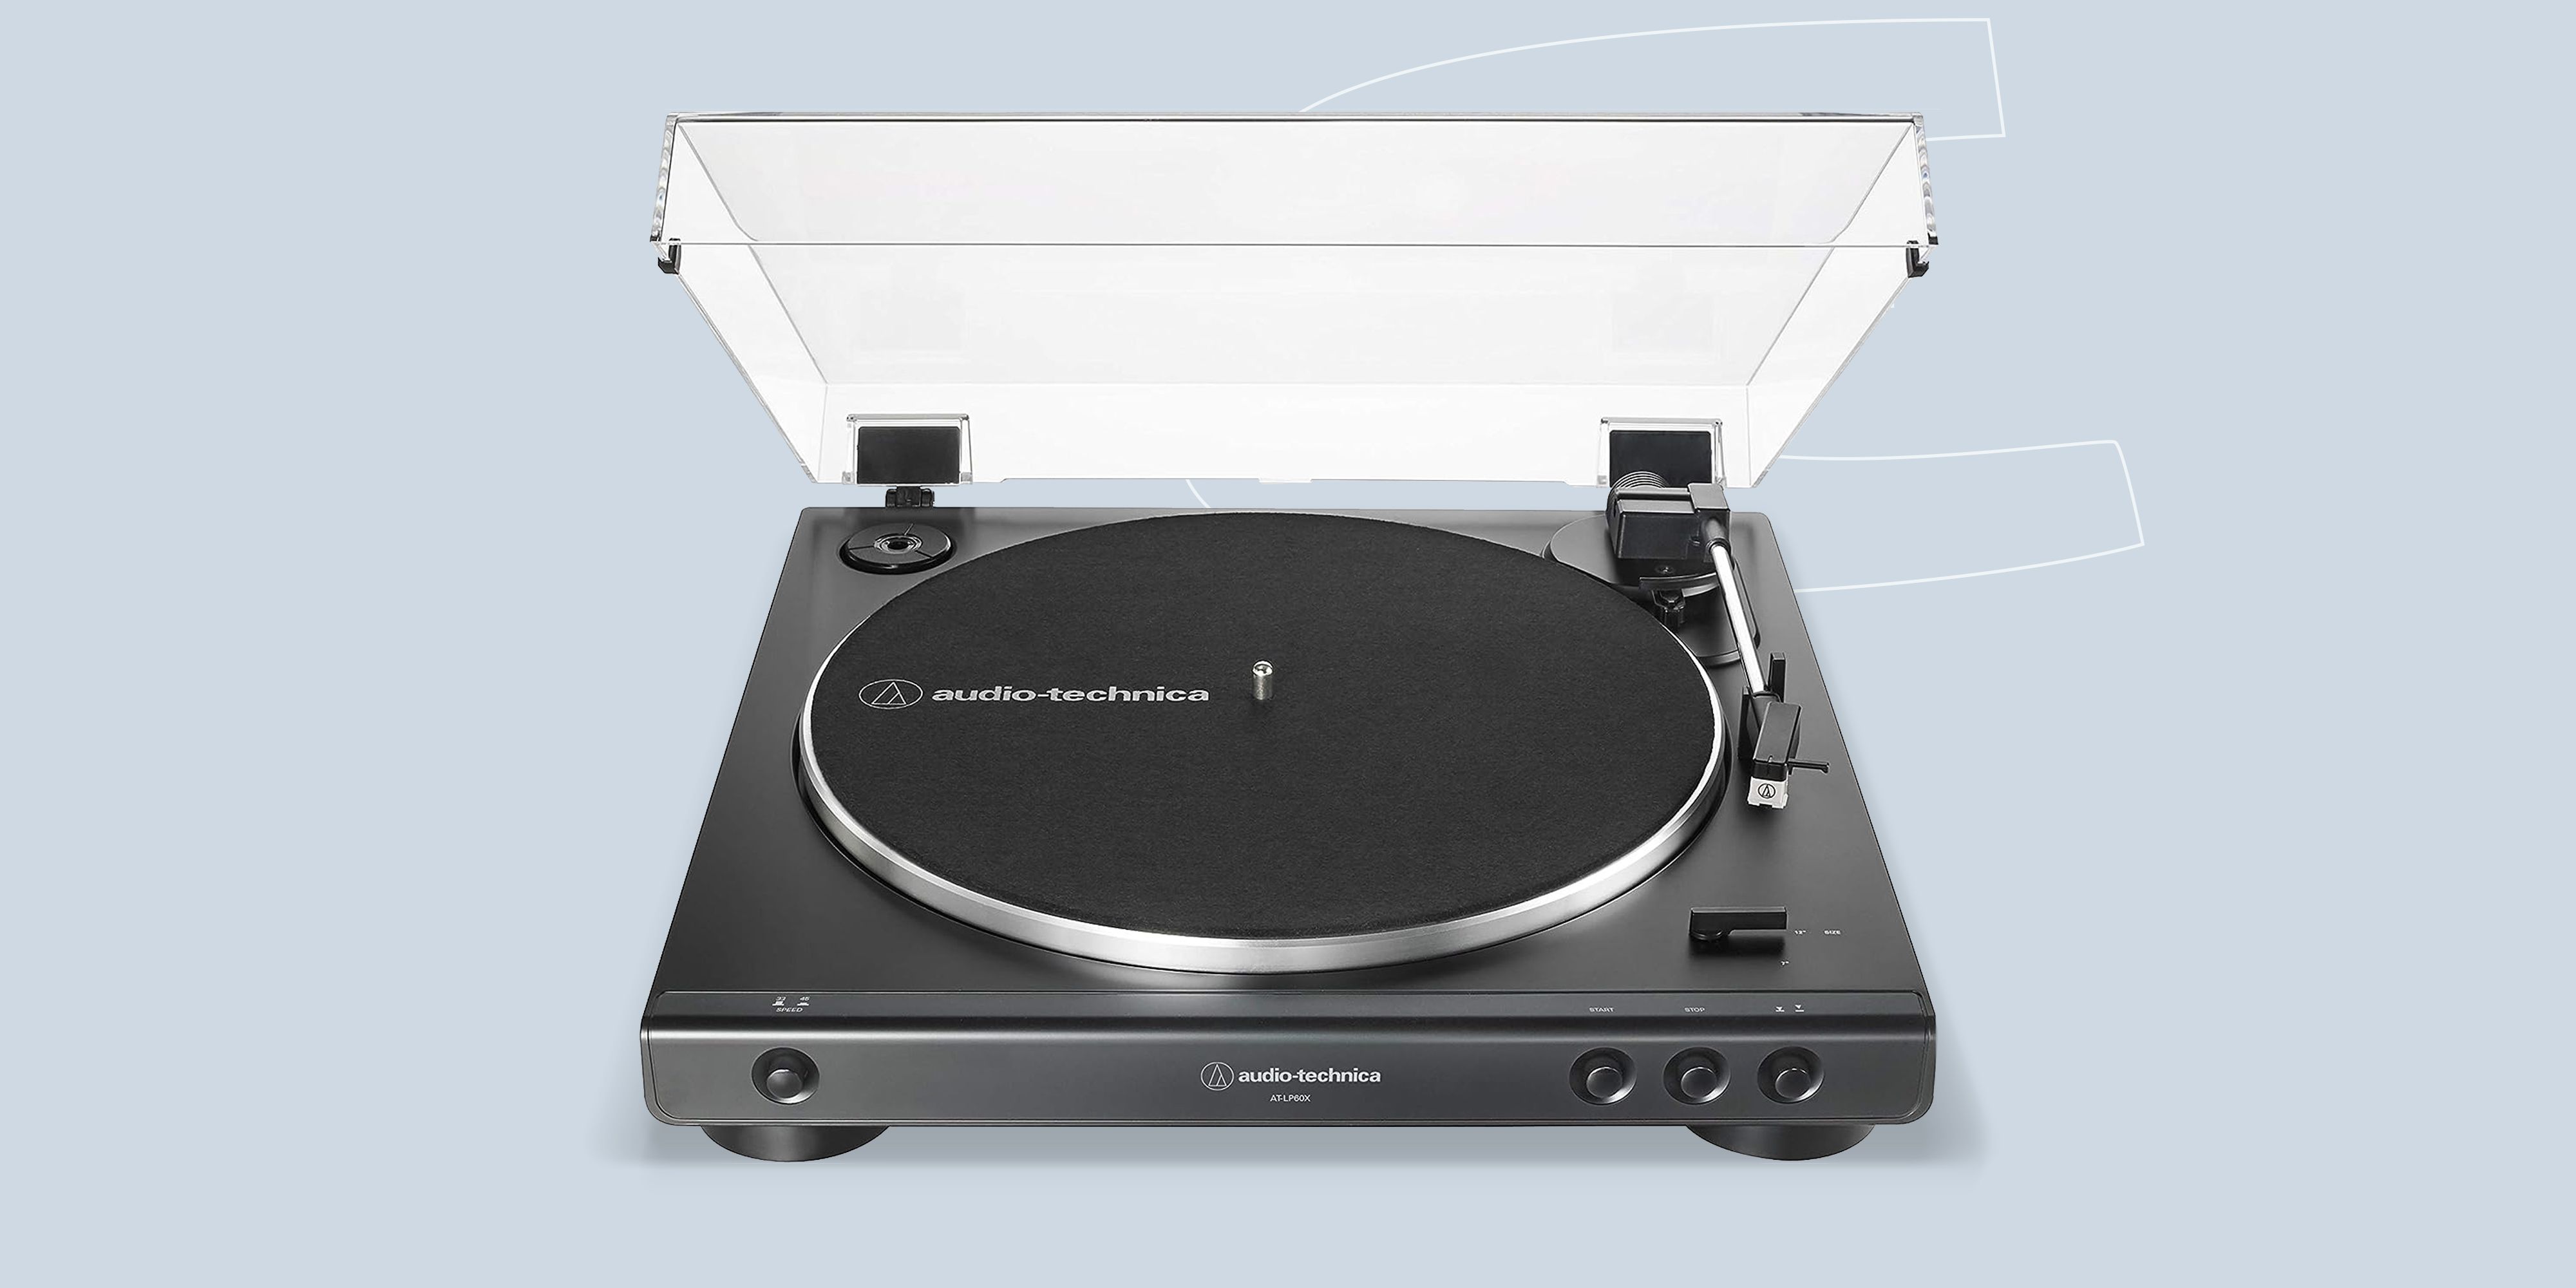 Listen to Your Music on This Miniature Turntable Speaker